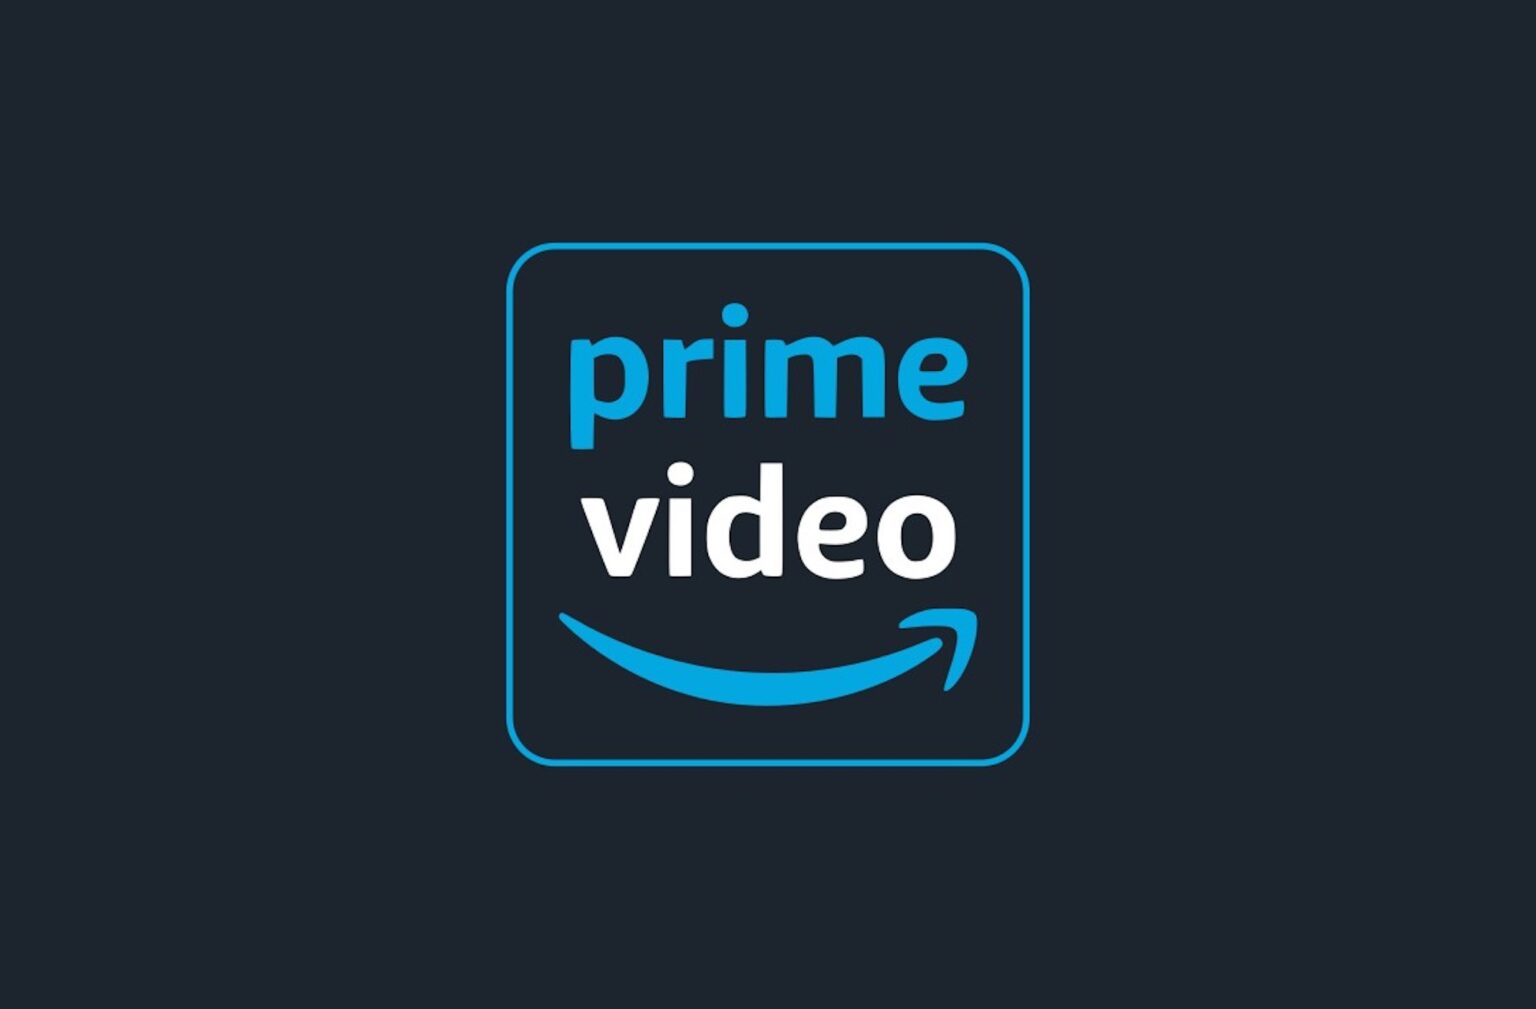 Dying for some new Prime movies this October? Check out the latest offerings to rent or to stream for free on Amazon Prime!